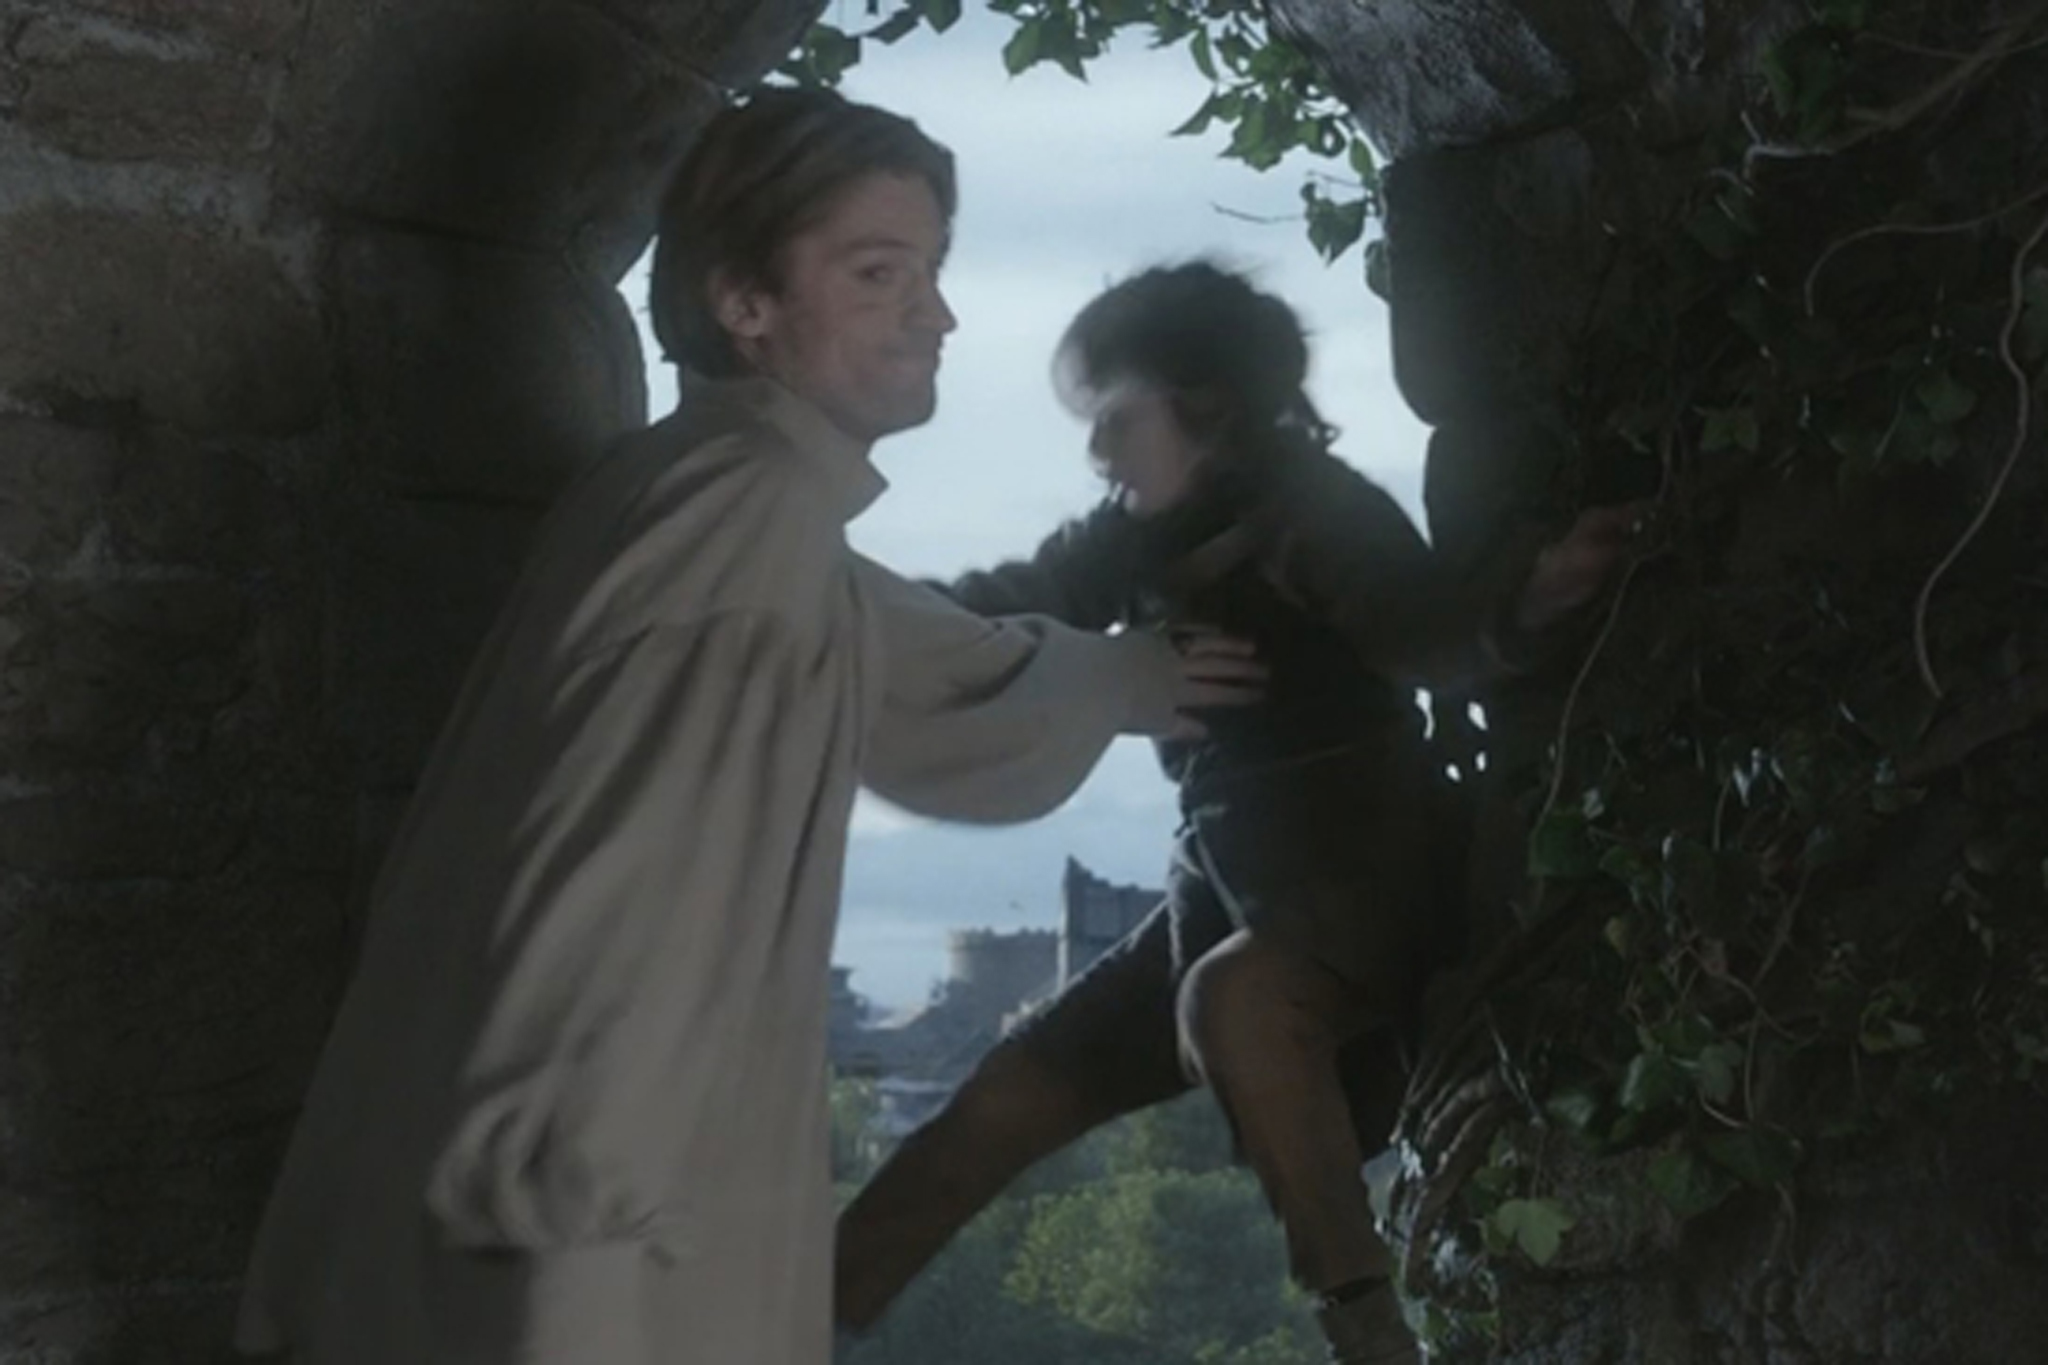 Jaime pushes Bran out a window for Cersei in season one, and Cersei's actions force Tommen to take his own life by jumping out a window in season eight. 